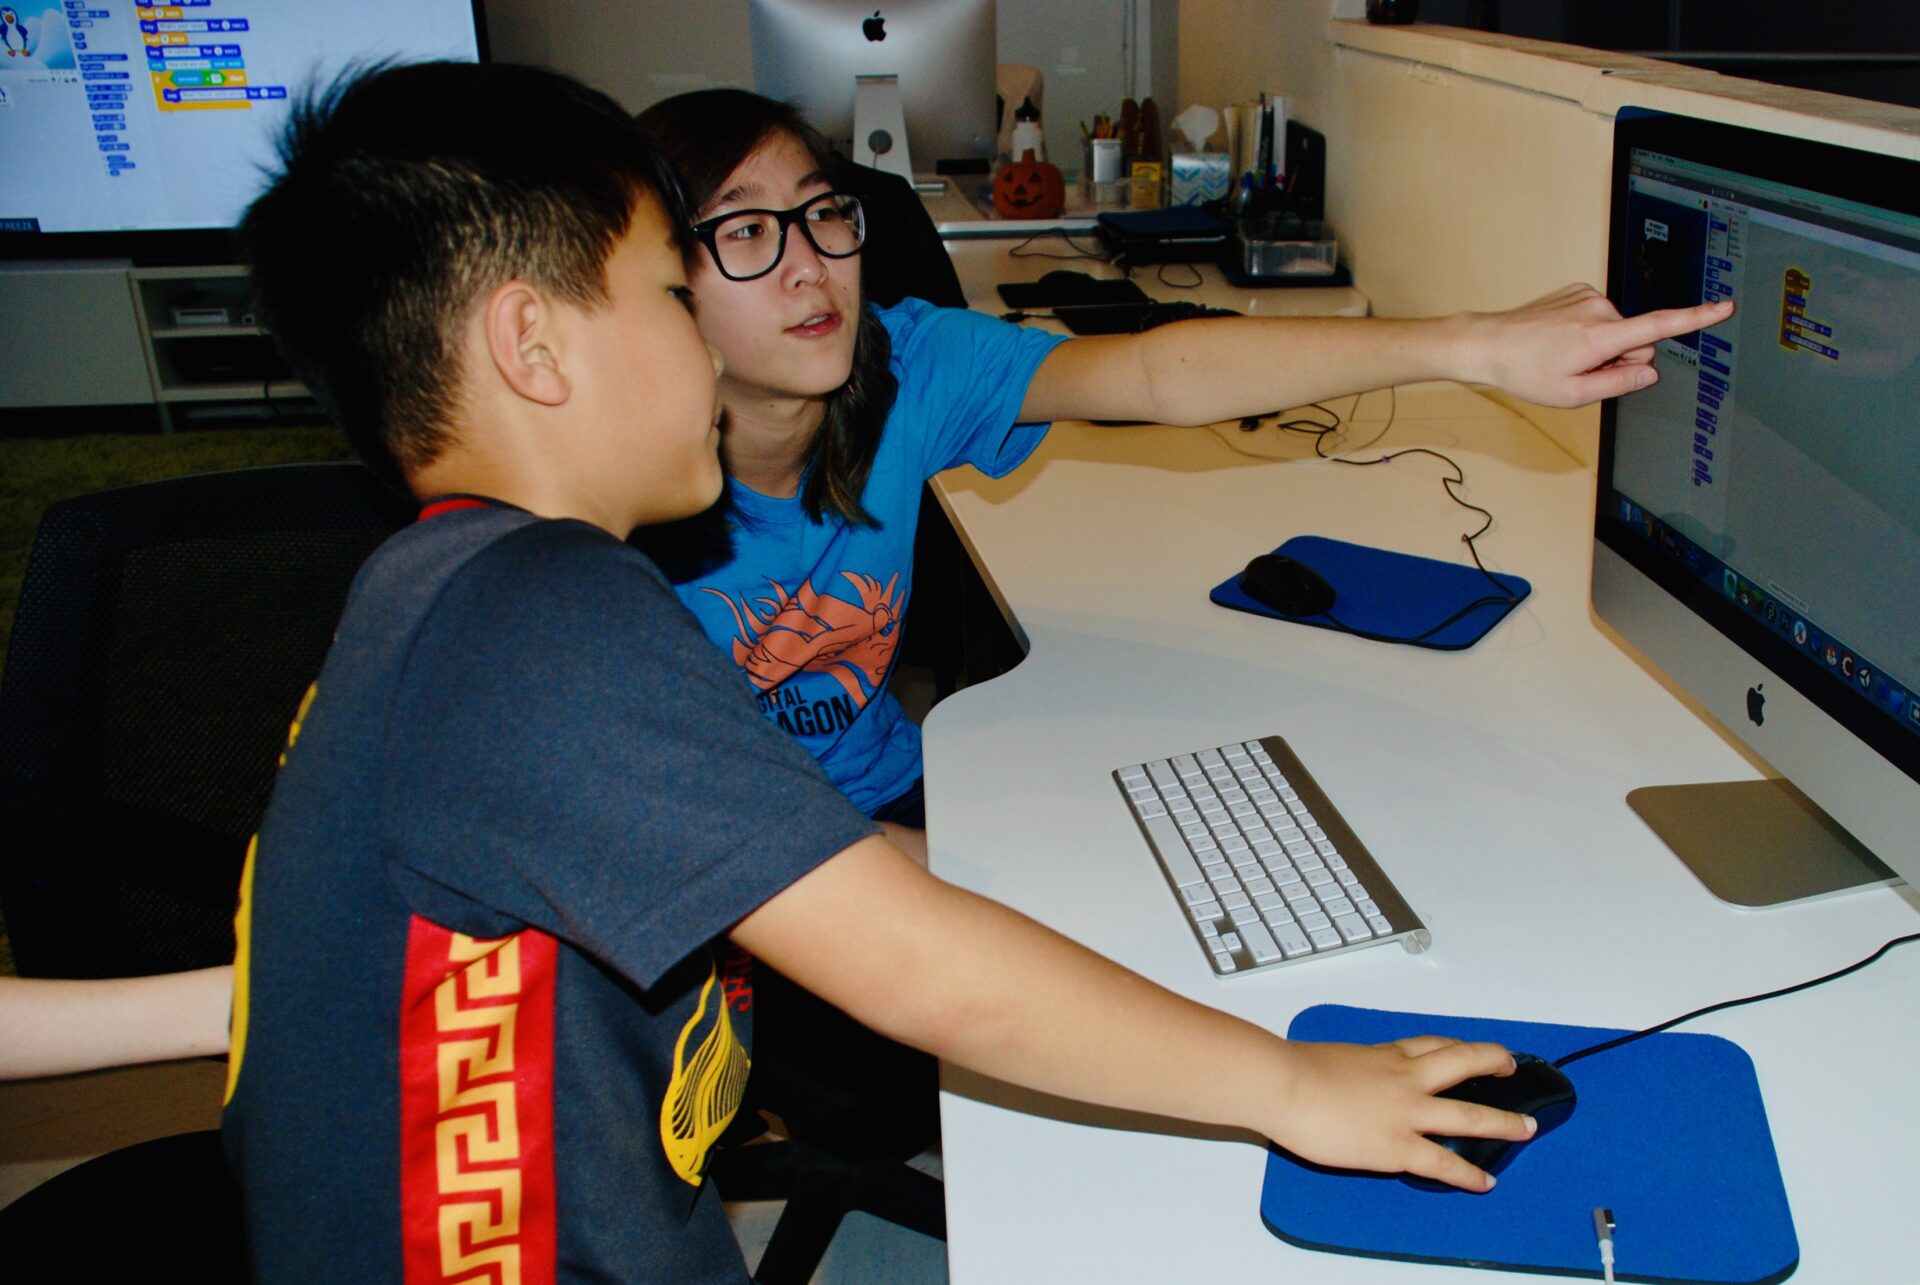 Kids learn to code in summer camps.